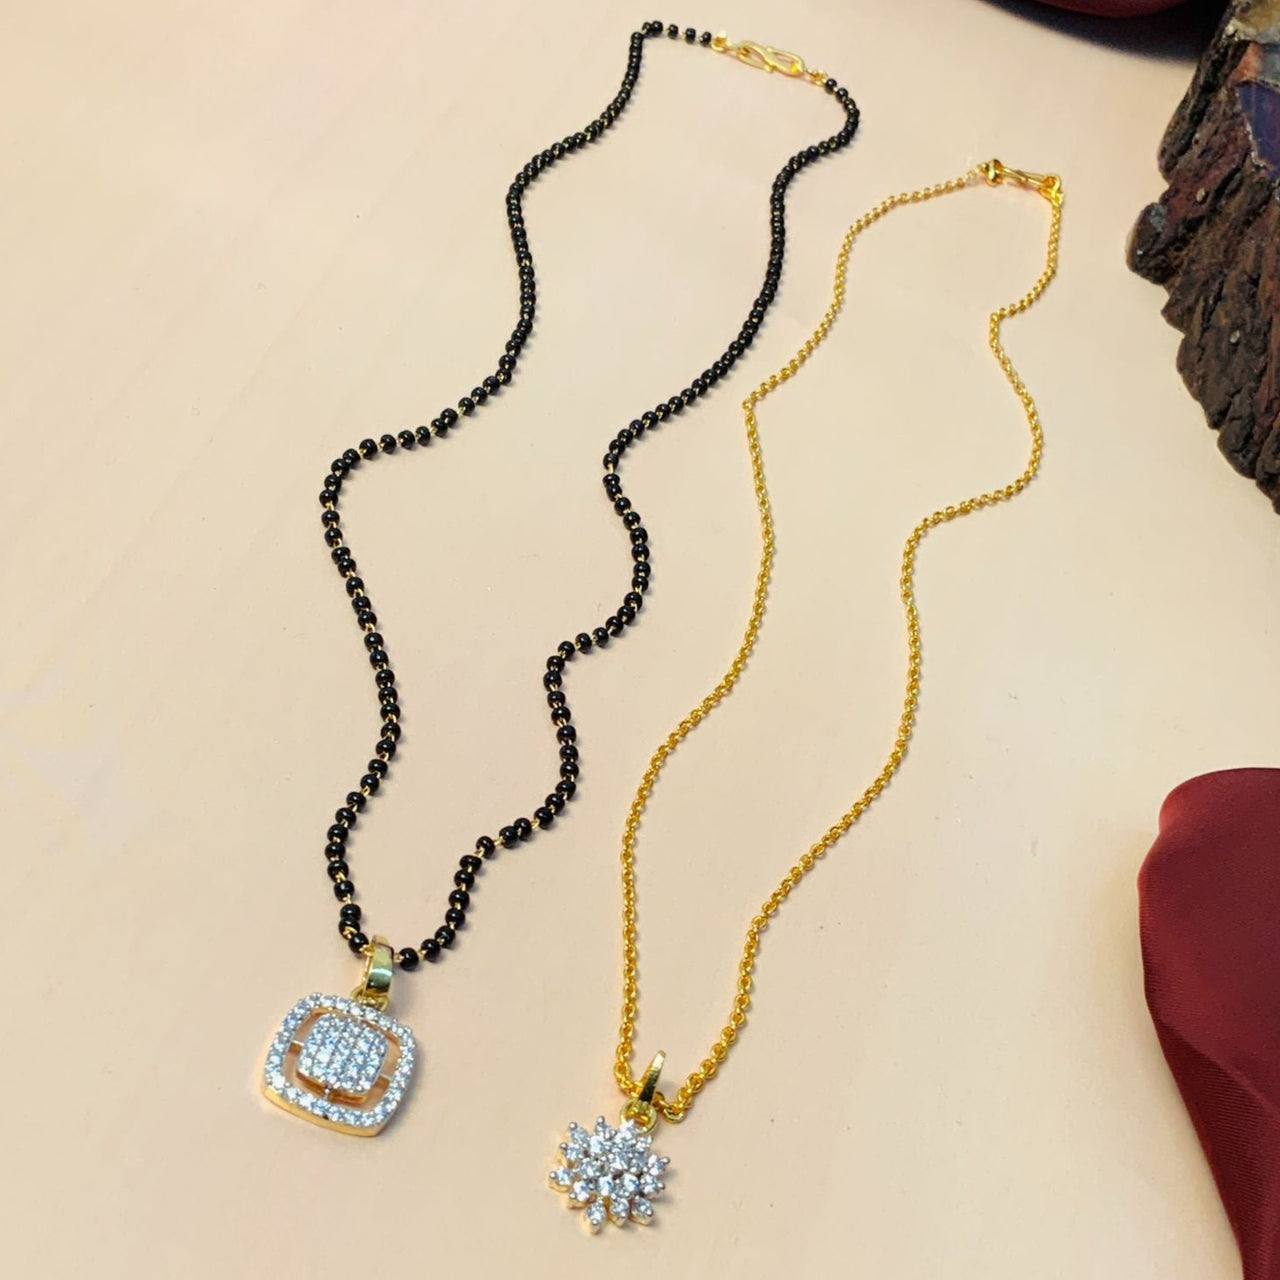 Exclusive High Quality Gold Plated American Diamond Mangalsutra & Pendant Chain Combo